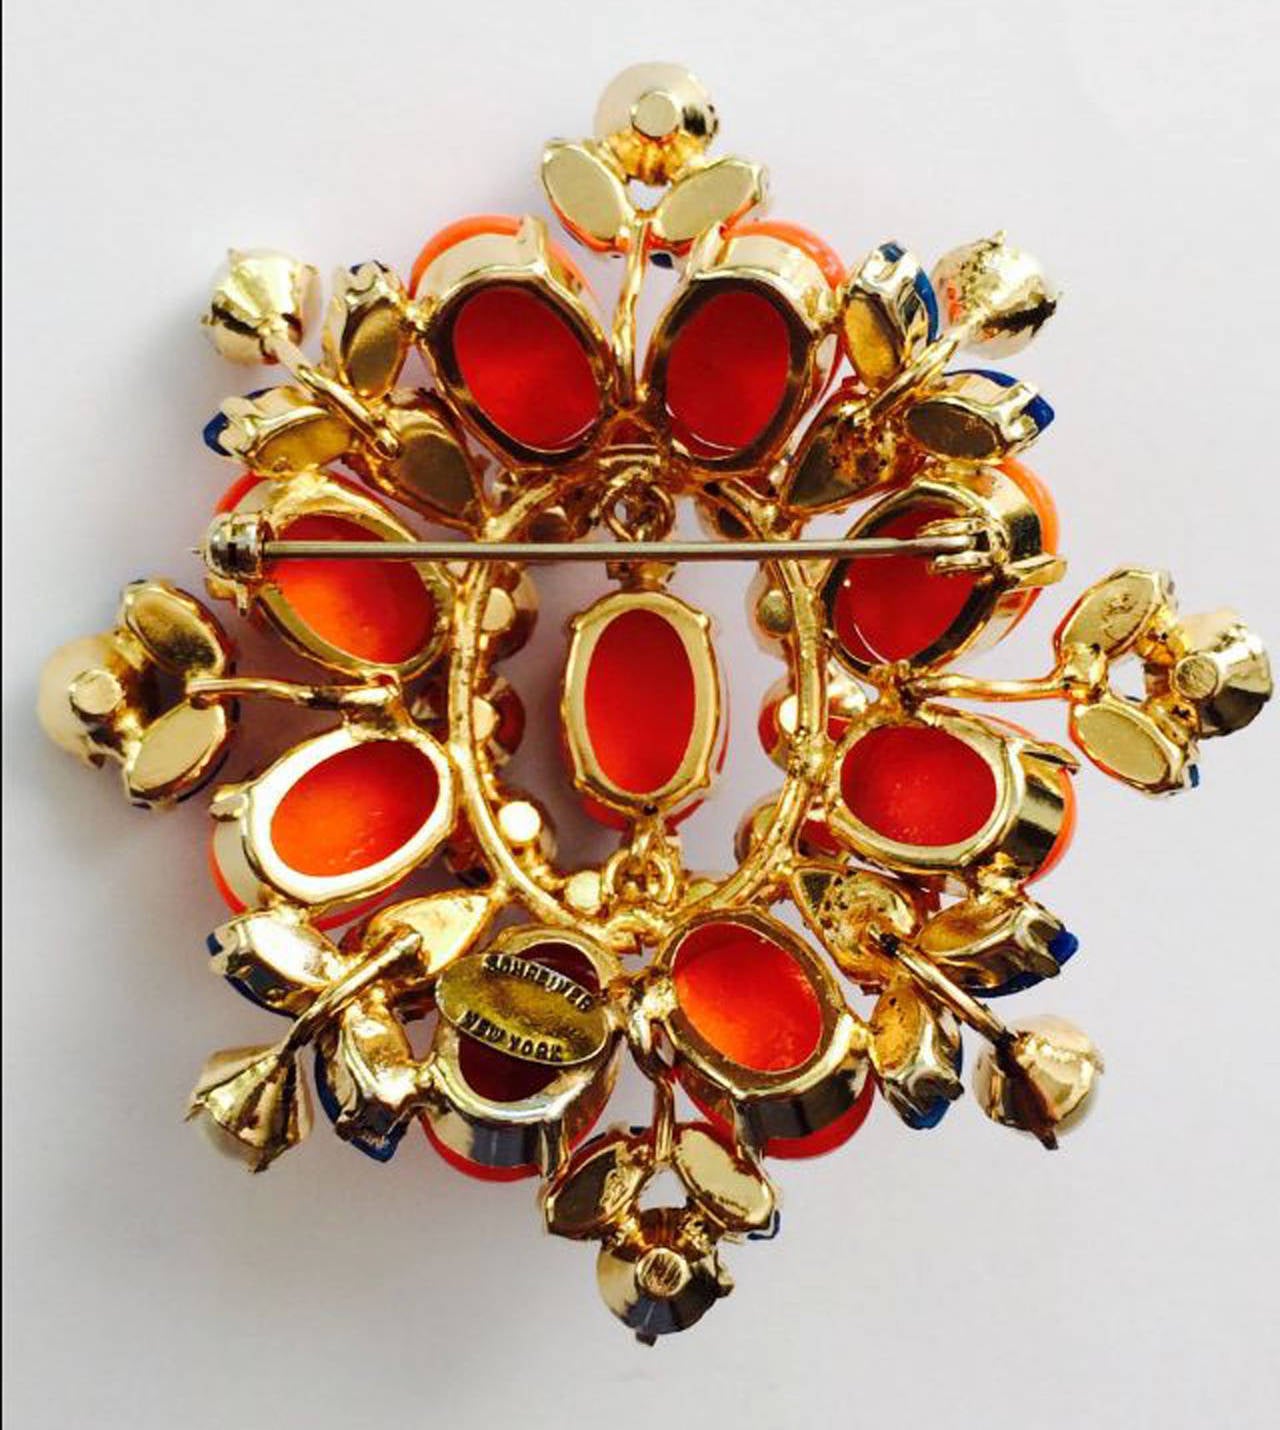 A fine vintage Schreiner New York brooch. Signed gilt metal item features faux coral, Lapis, pearls and crystals. Pristine appears unused.